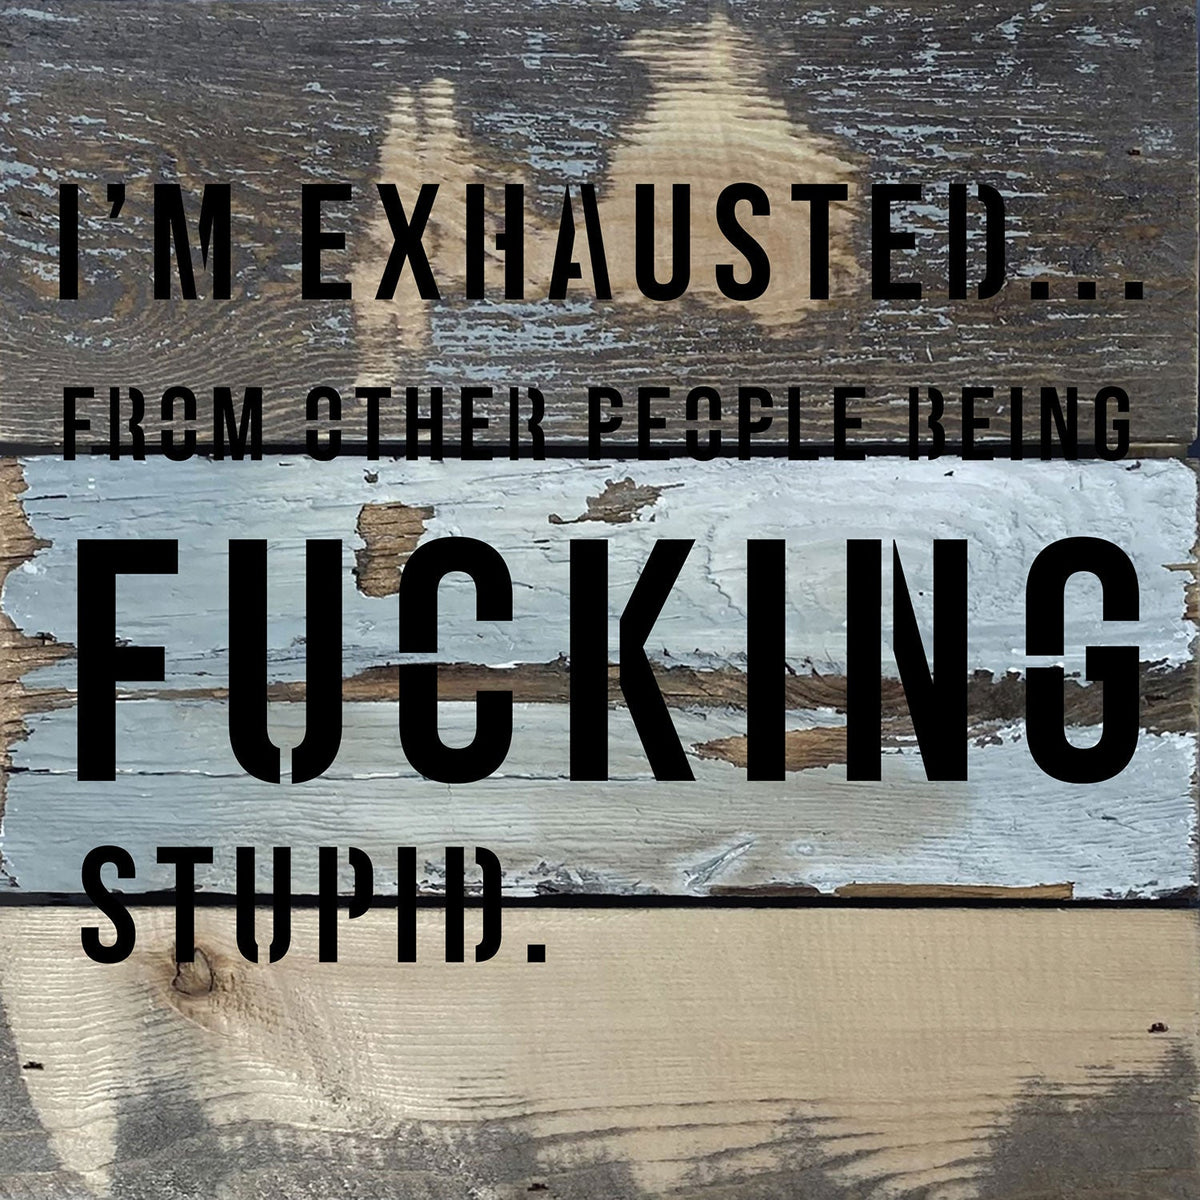 I'm Exhausted ... from other people being fucking stupid / 8x8 Blue Whisper Reclaimed Wood Wall Decor